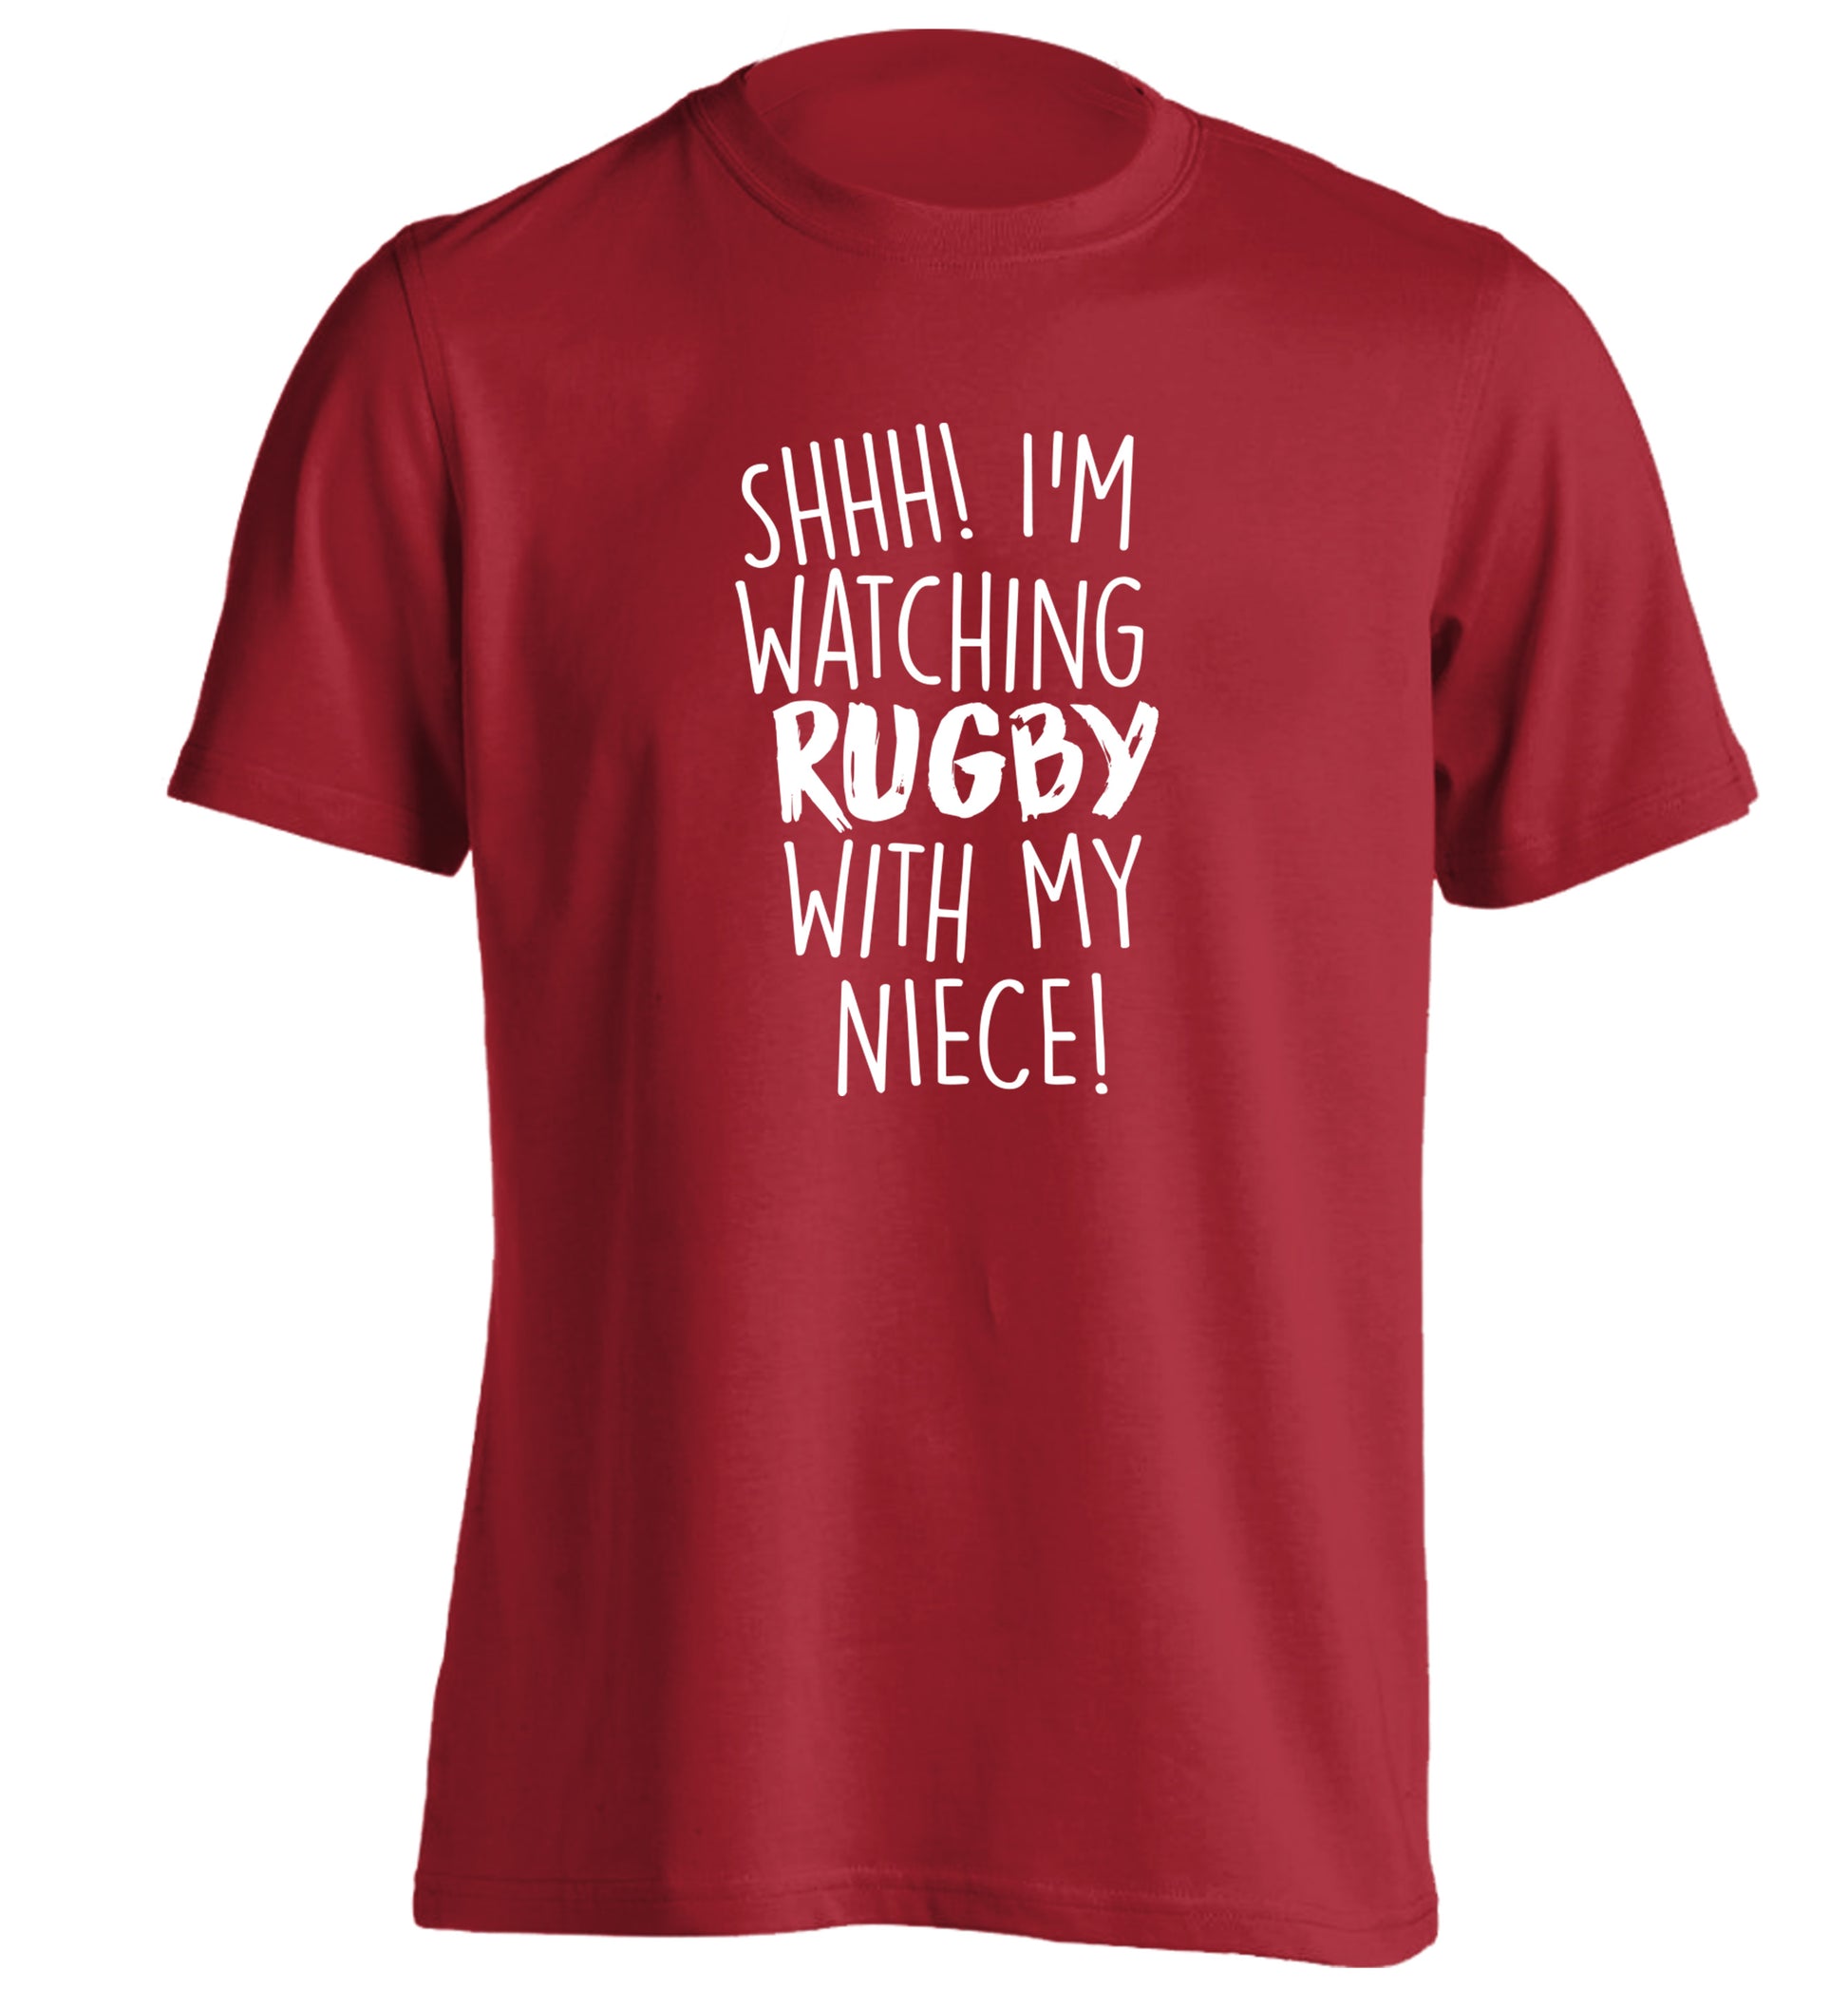 Shh.. I'm watching rugby with my niece adults unisex red Tshirt 2XL